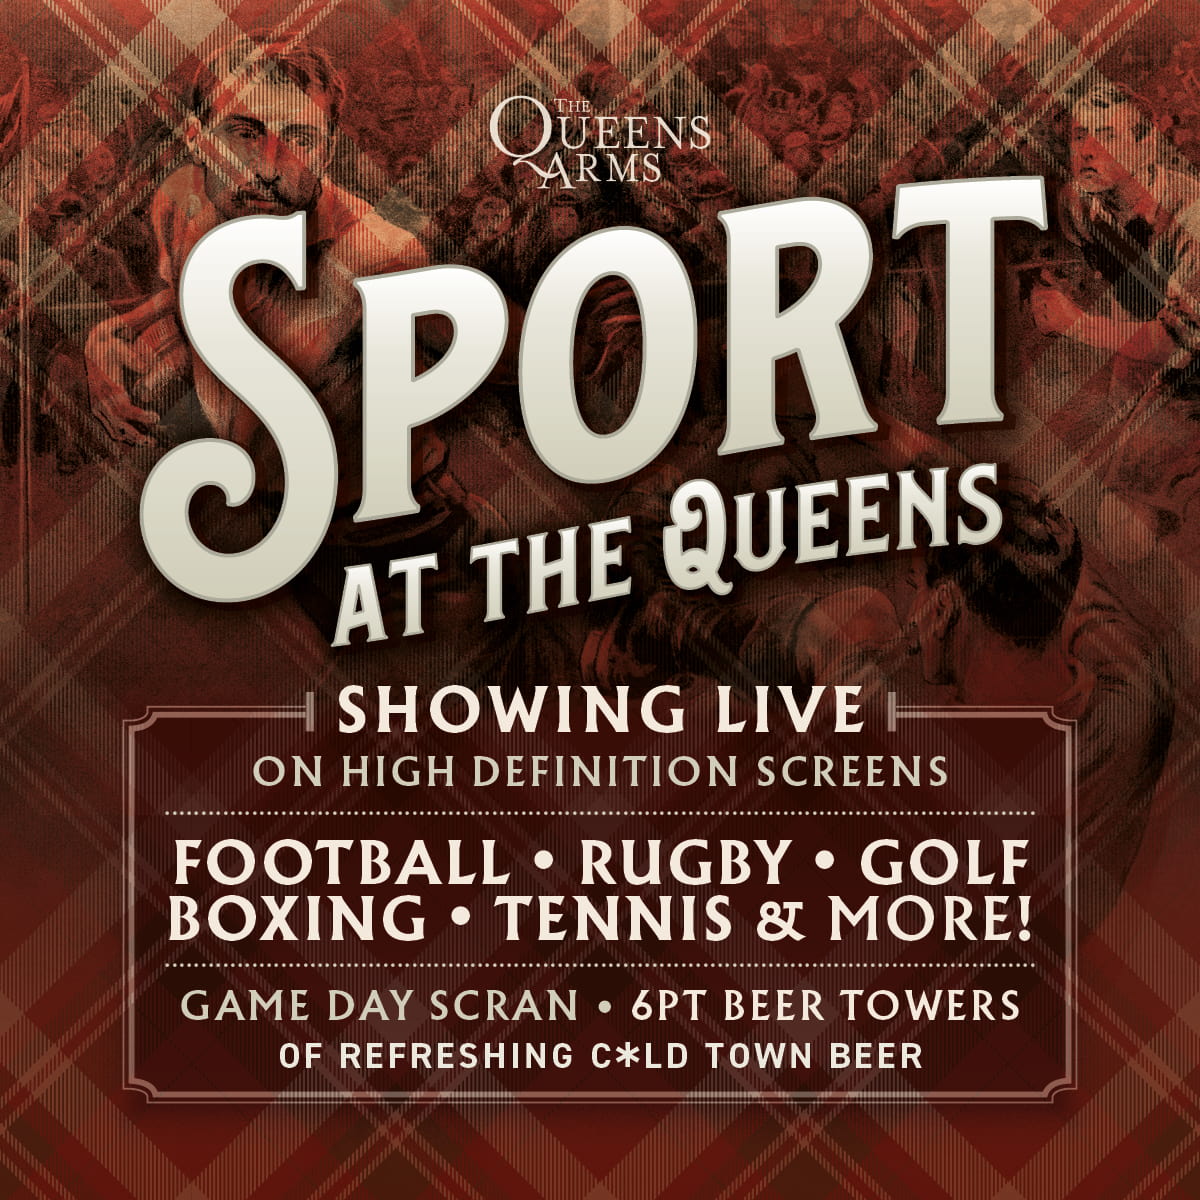 Watch All Sports at The Queens Arms, Edinburgh